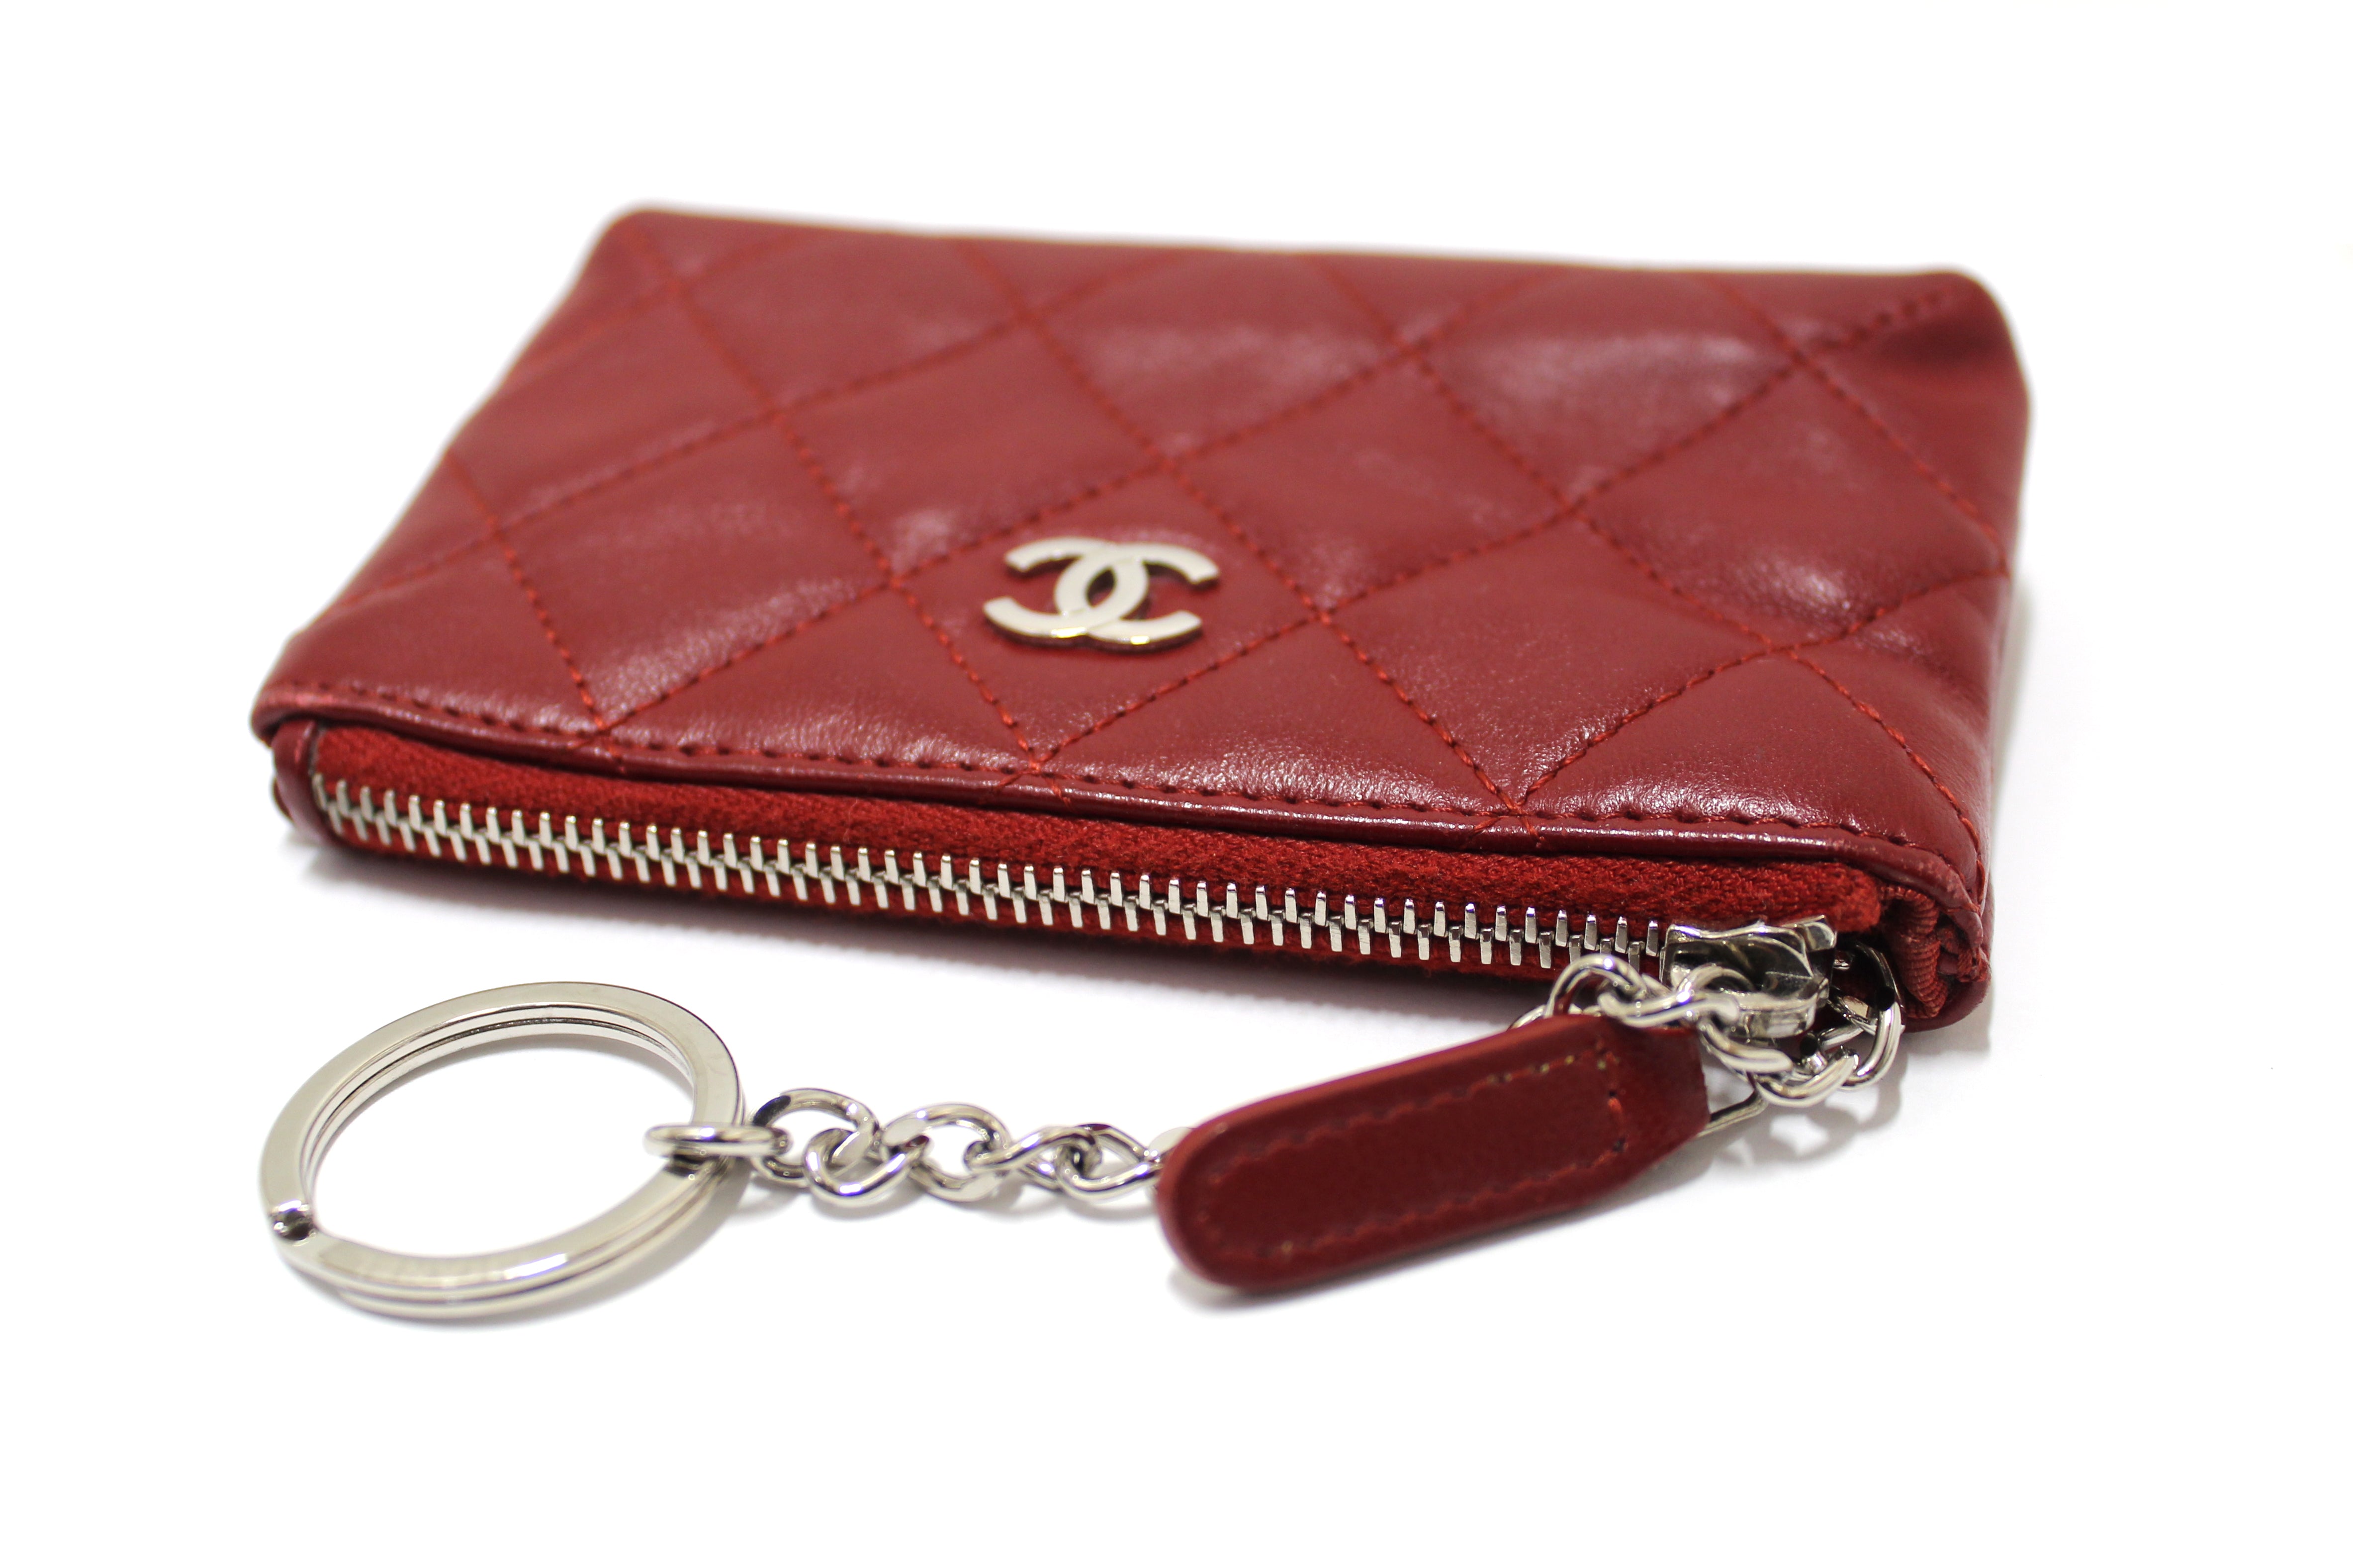 Authentic Chanel Red Quilted Lambskin Leather Classic Zipped Key Coin Purse